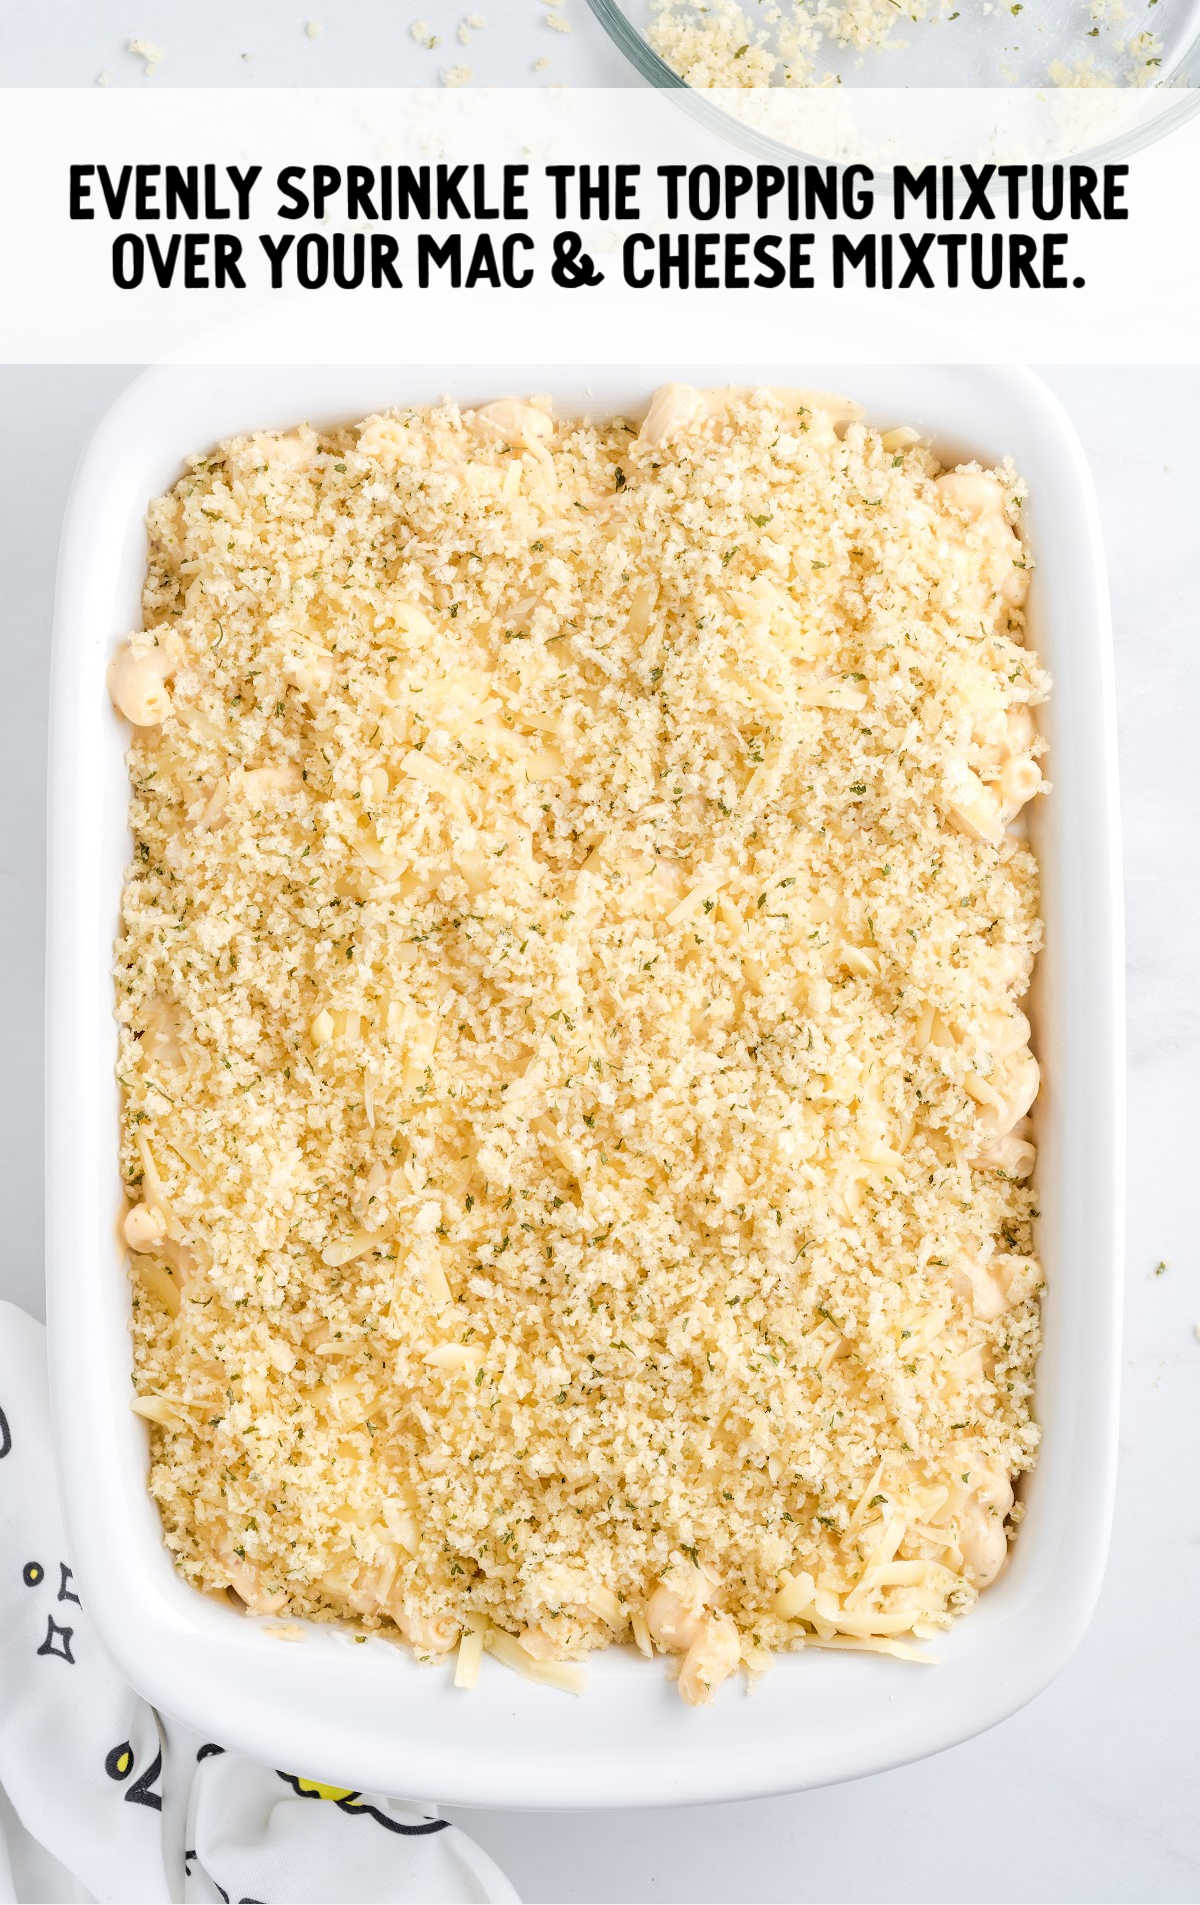 topping mixture being sprinkled over Mac and cheese in a casserole dish